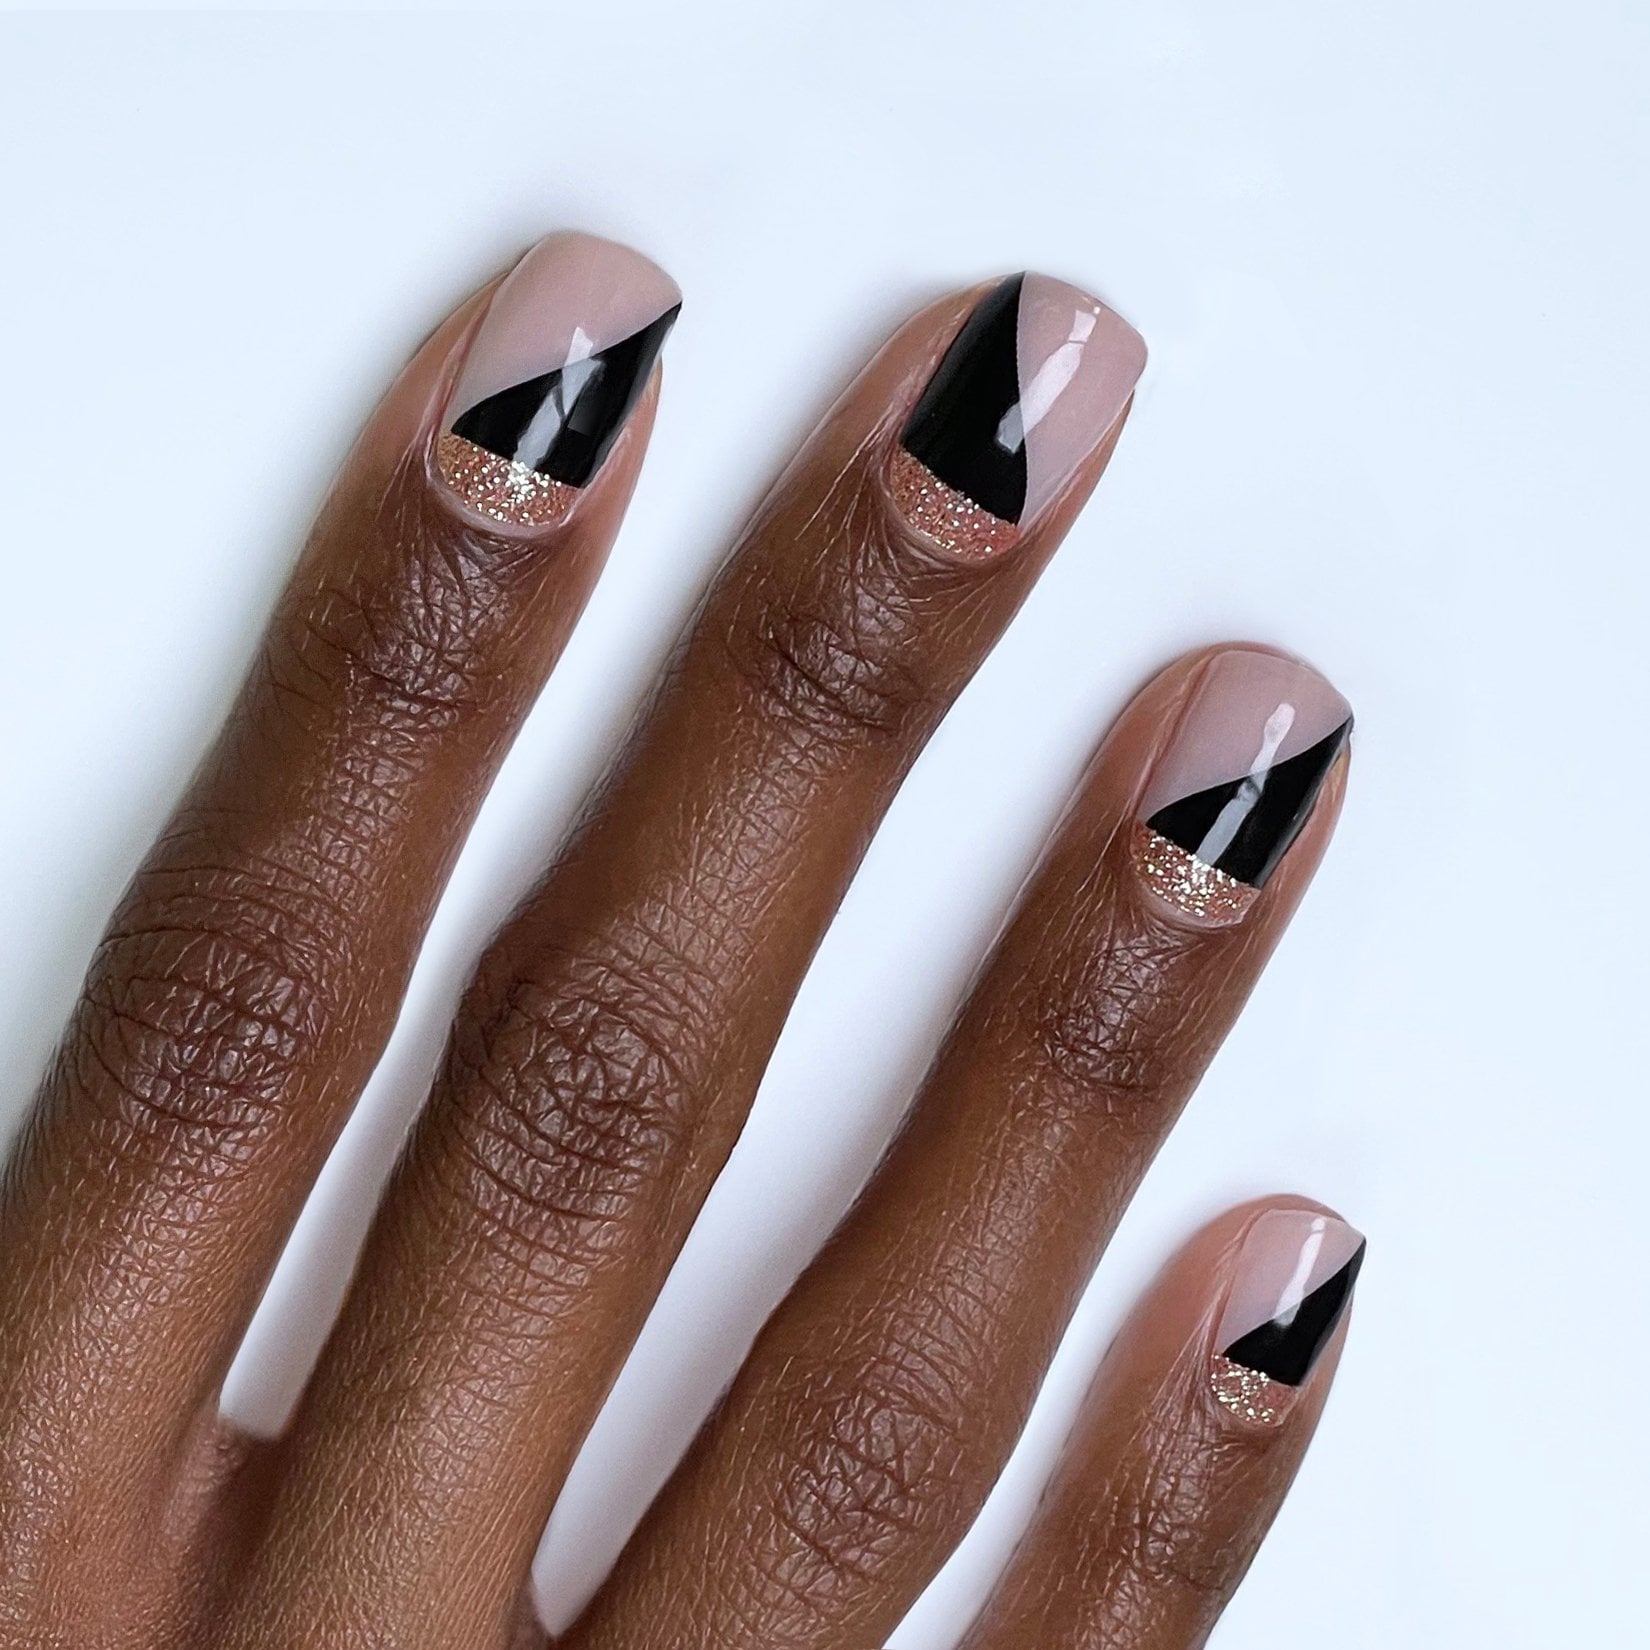 8 Best Nail Wraps For a Great Manicure in Minutes | POPSUGAR Beauty